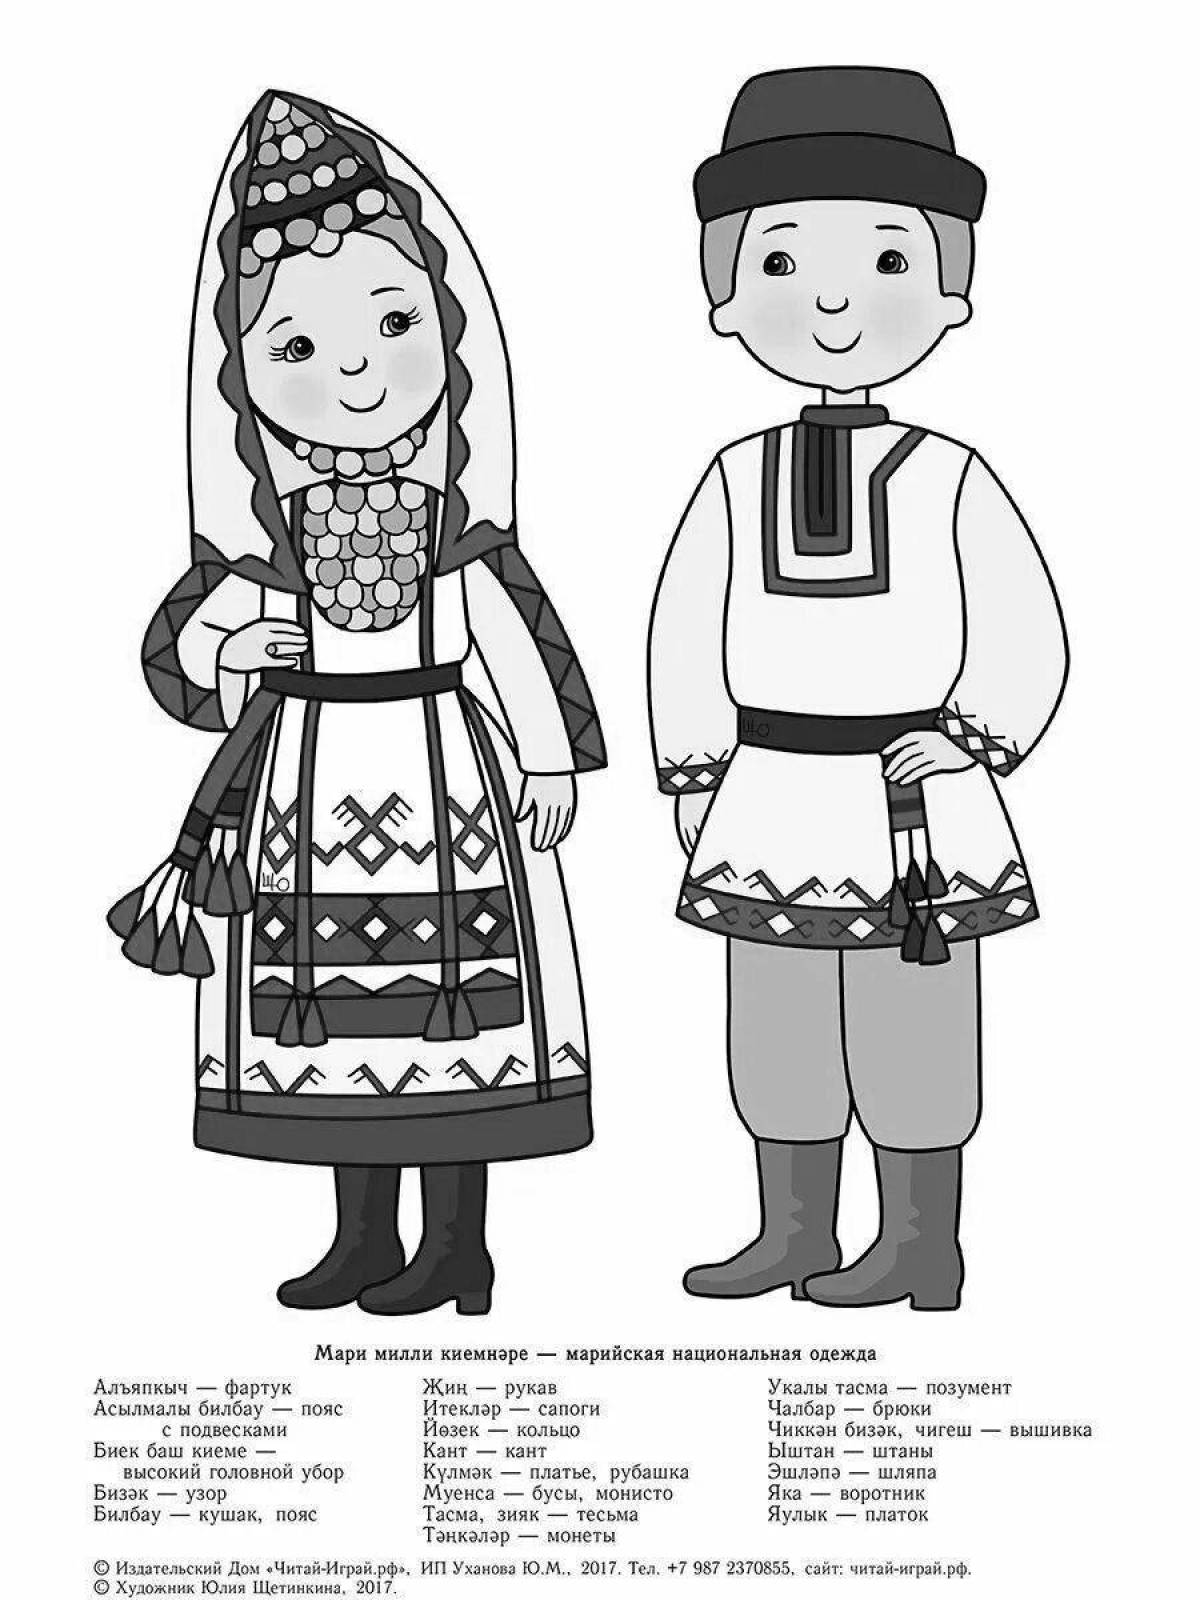 Charming coloring of Russian people